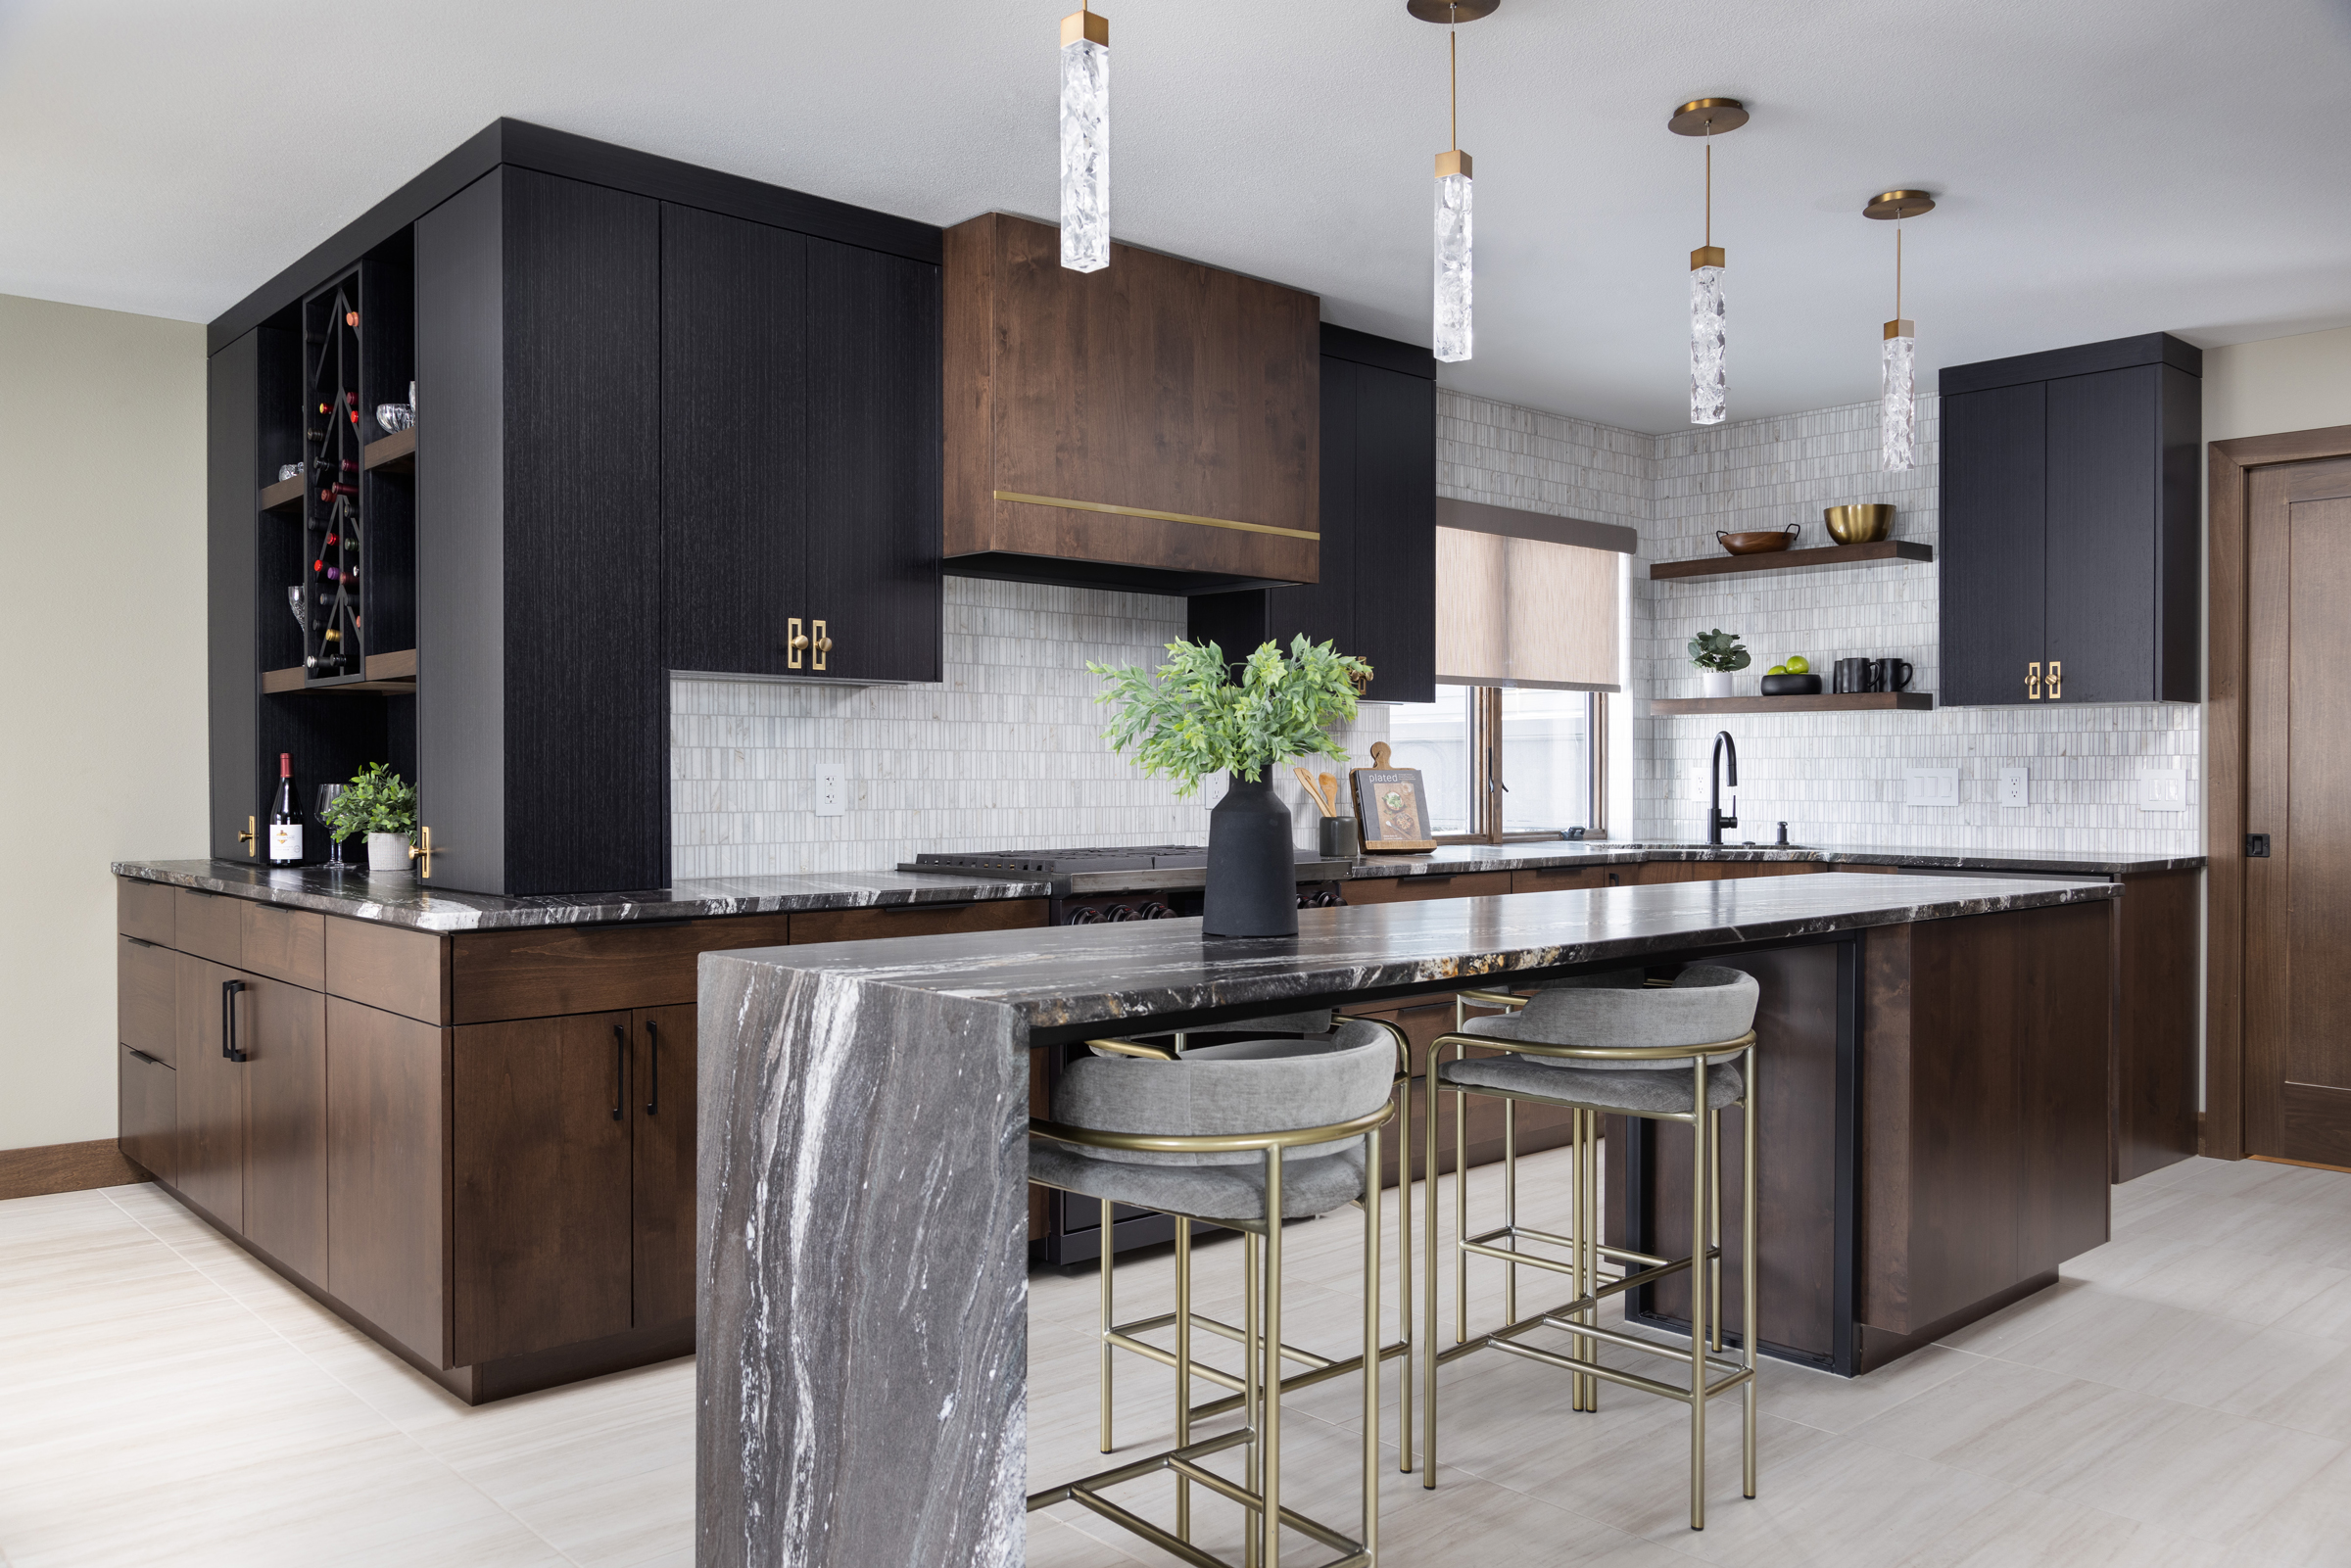 Kitchenette - Transitional - Kitchen - Minneapolis - by A & K Custom  Cabinetry